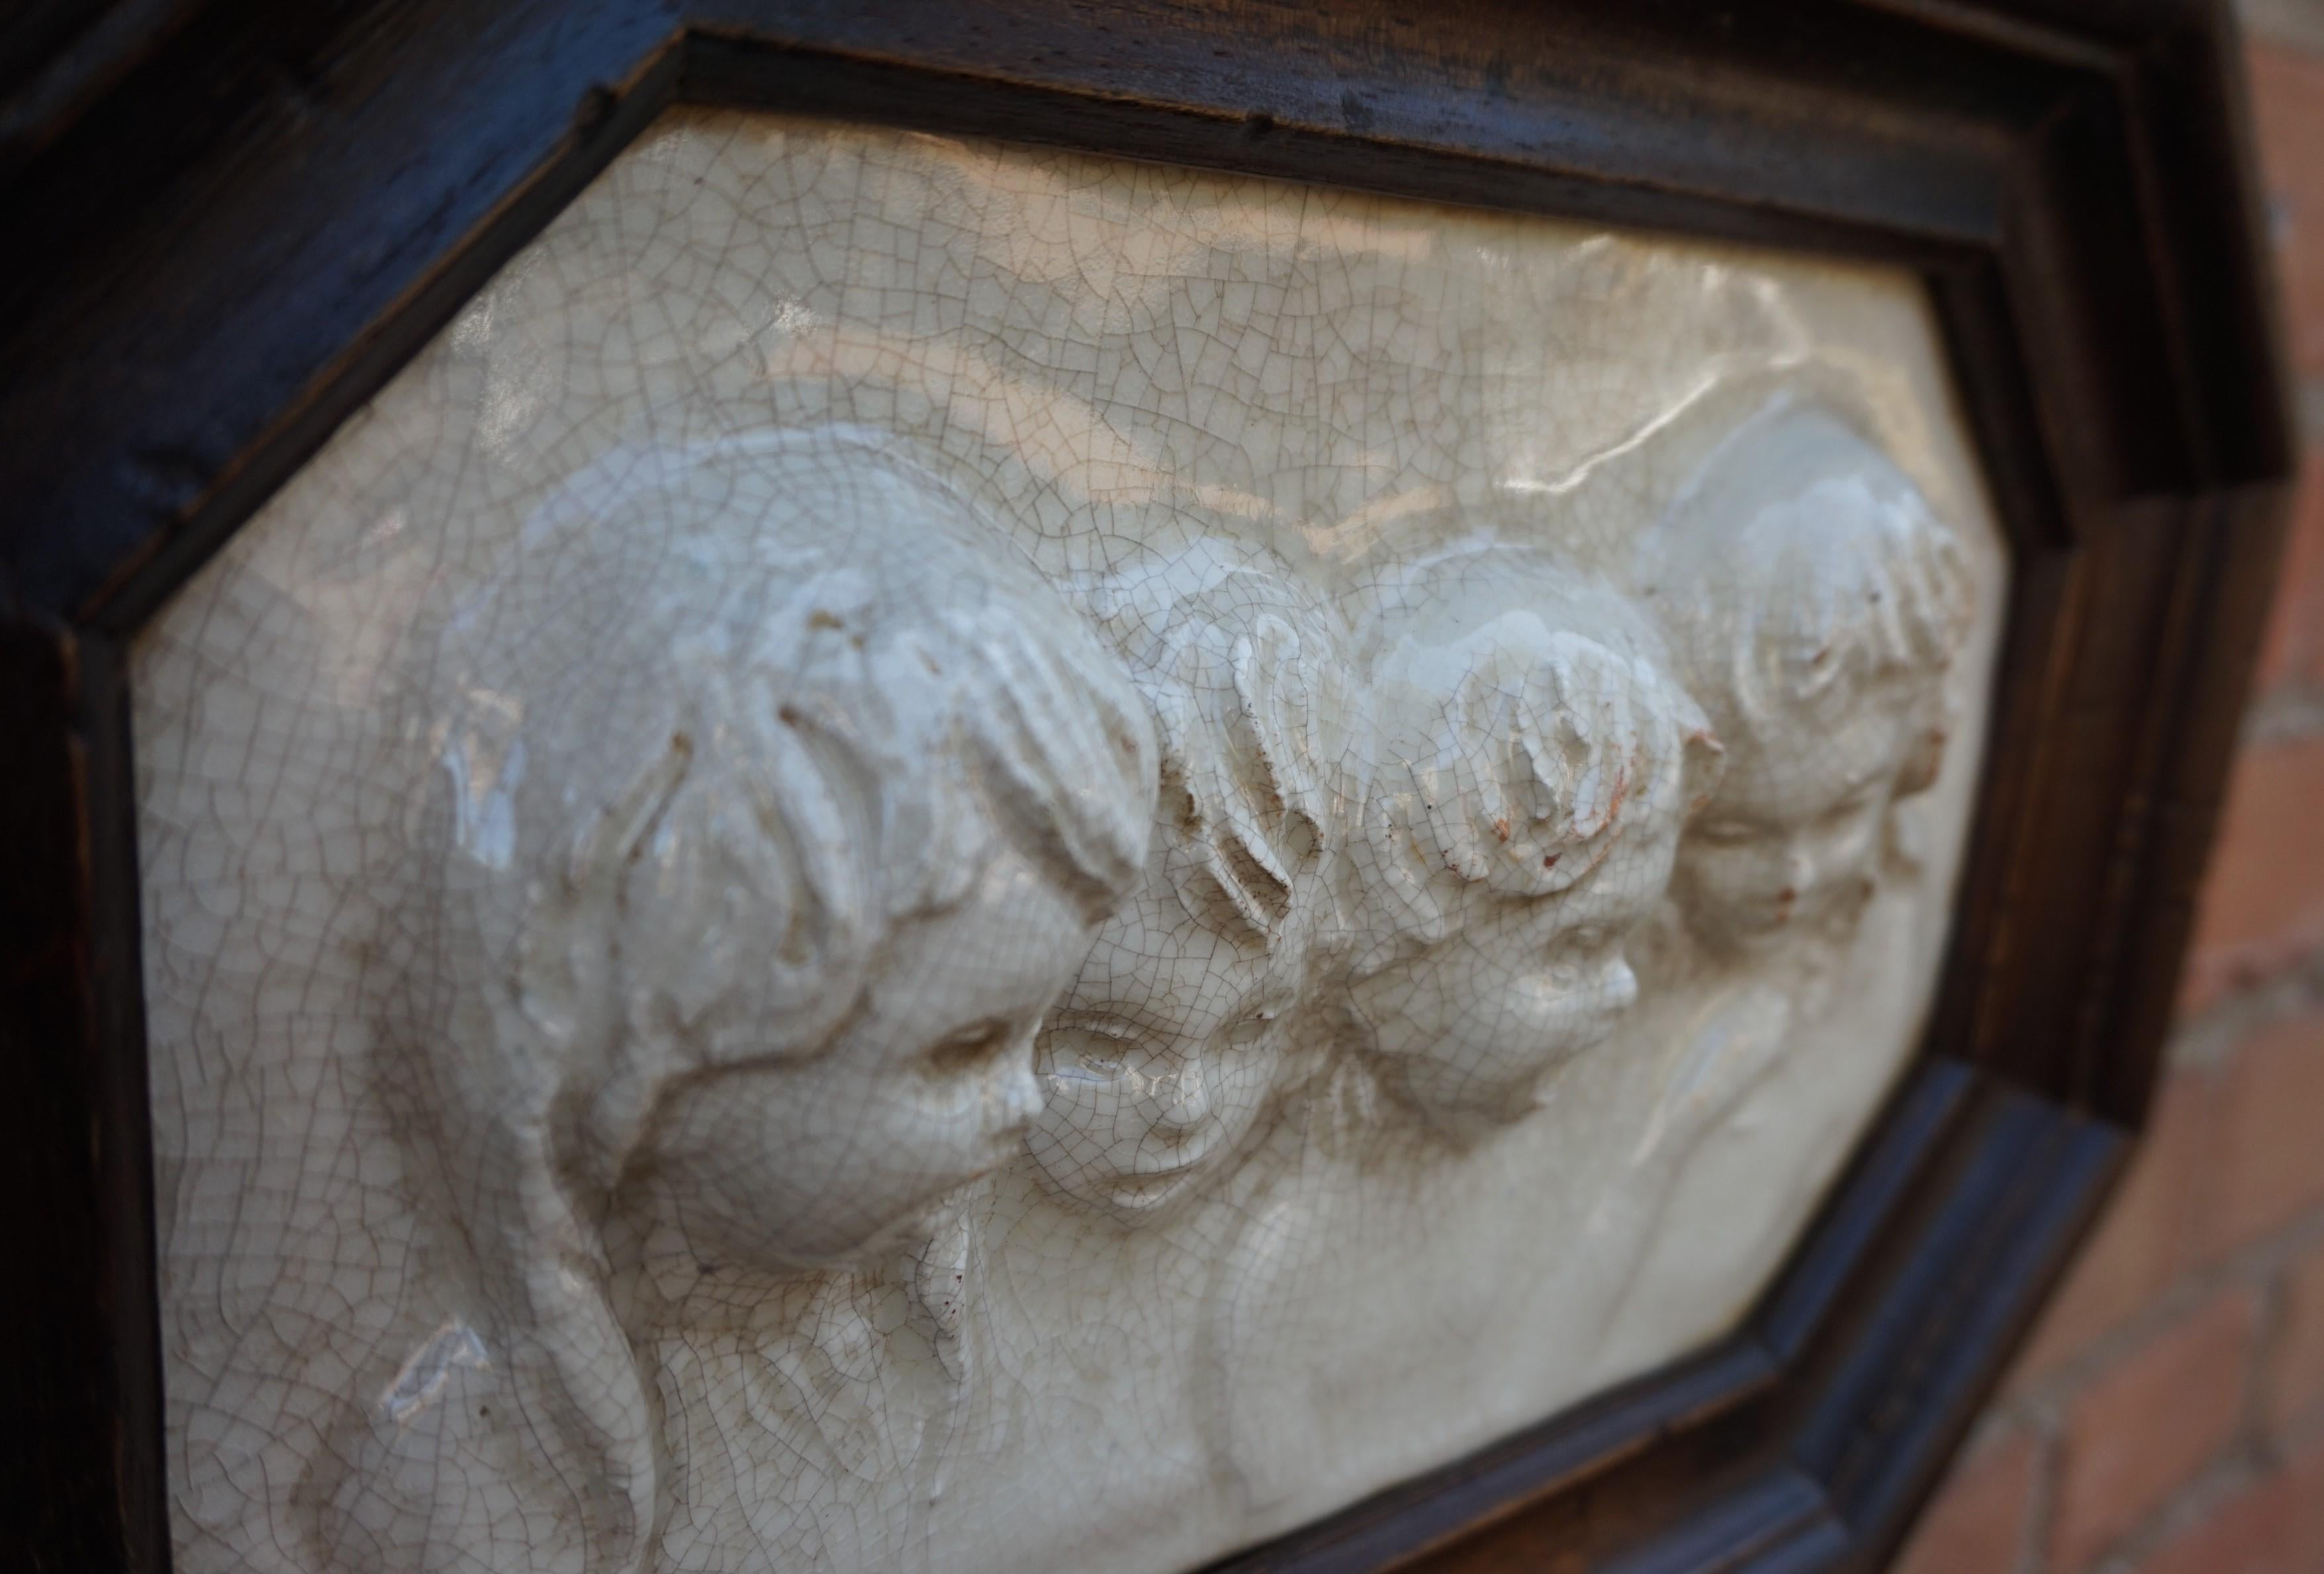 Ceramic Antique Tile in Frame with Devout Singing Angelic Children Sculptures in Relief For Sale